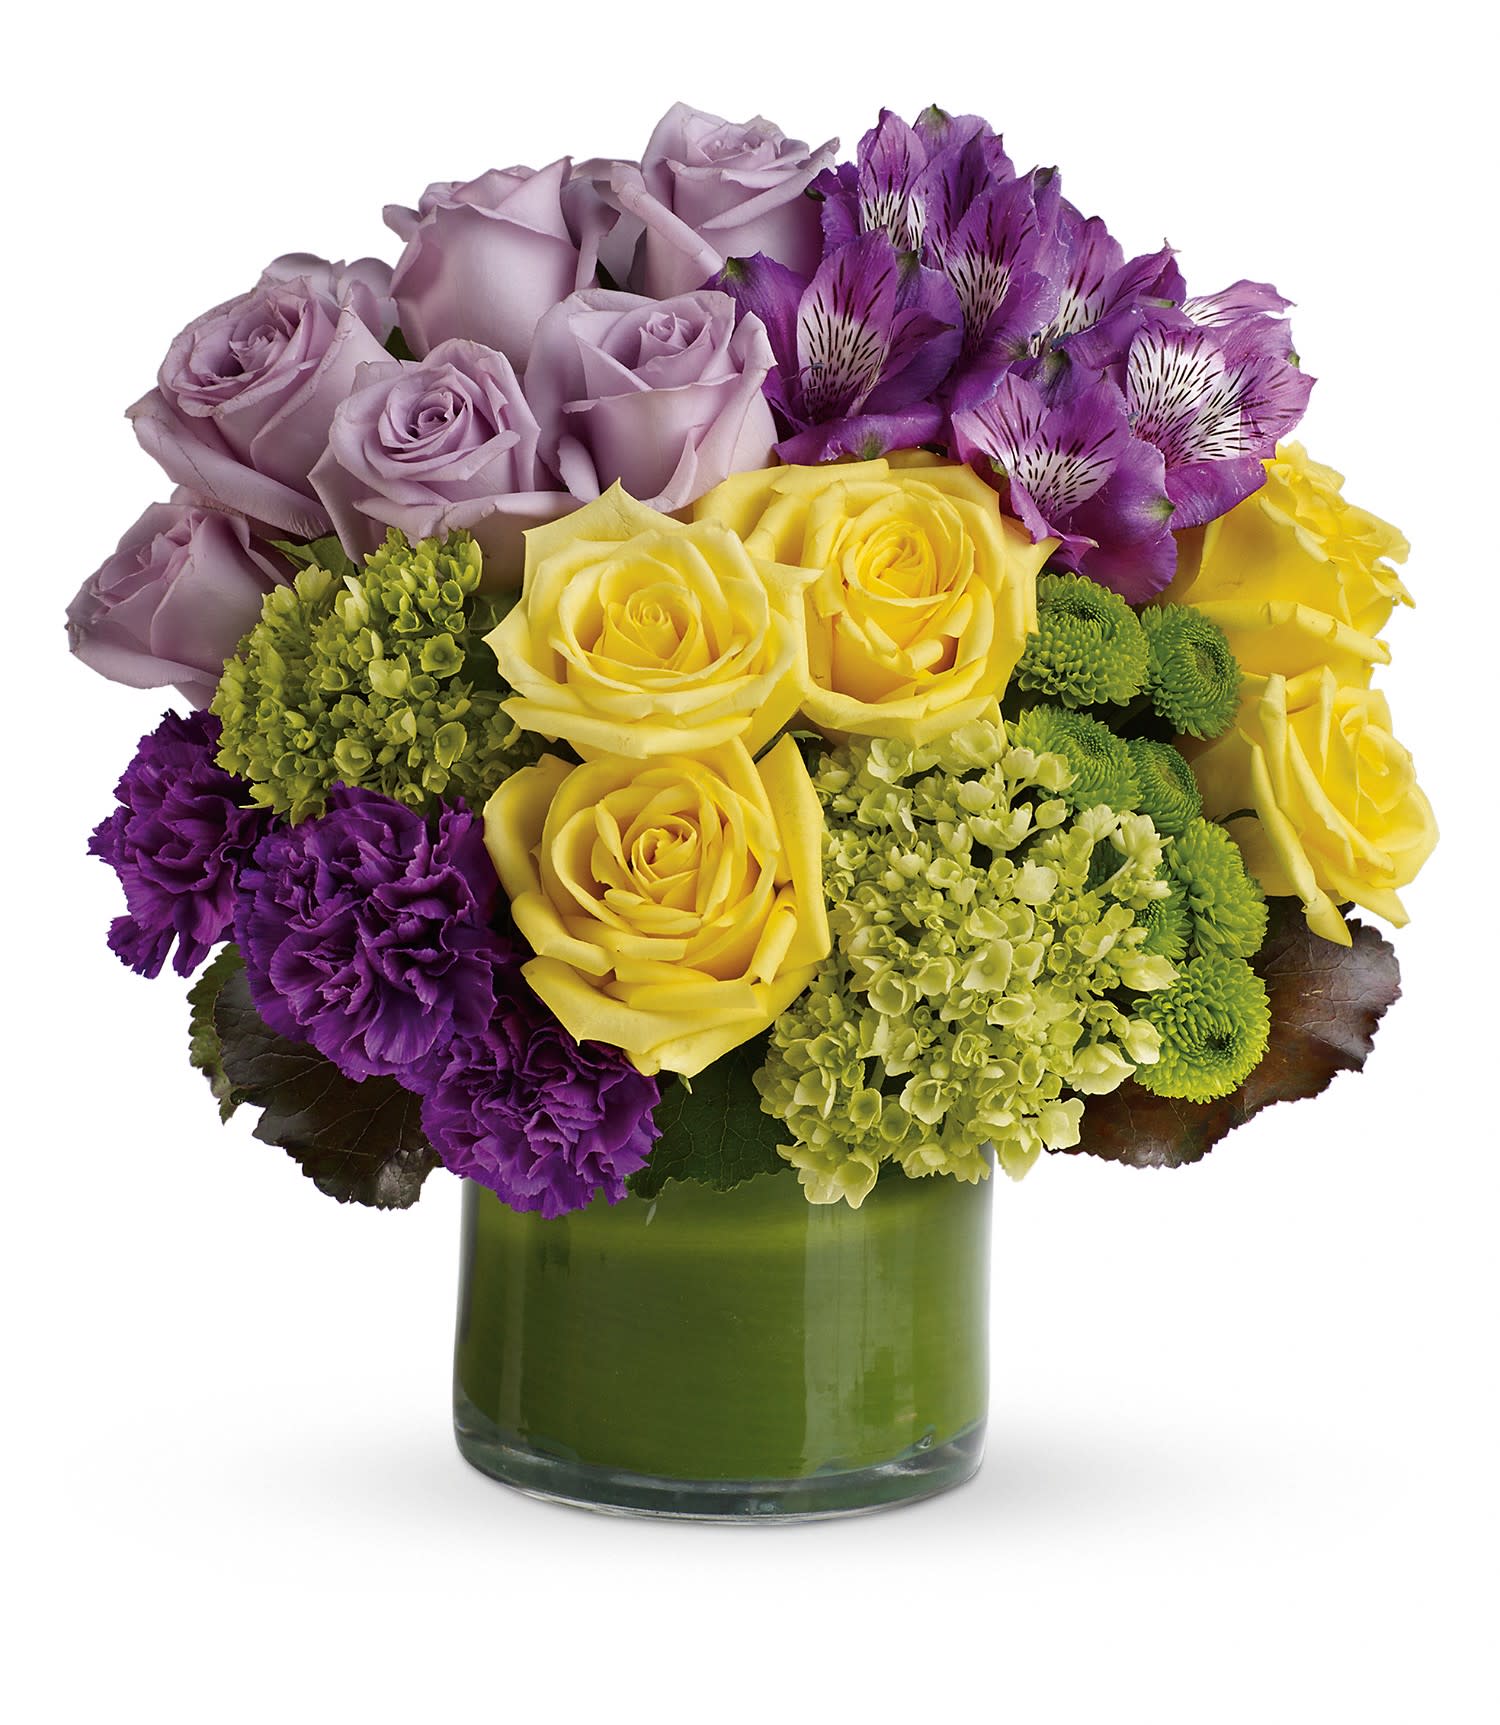 Simply Splendid Bouquet - This chic arrangement includes miniature green hydrangea, lavender and yellow roses, purple alstroemeria, dark purple carnations, green button spray chrysanthemums, galax leaves and a ti leaf. Delivered in a clear glass vase. Approximately 12&quot; W x 12 1/2&quot; H    TEV42-2A